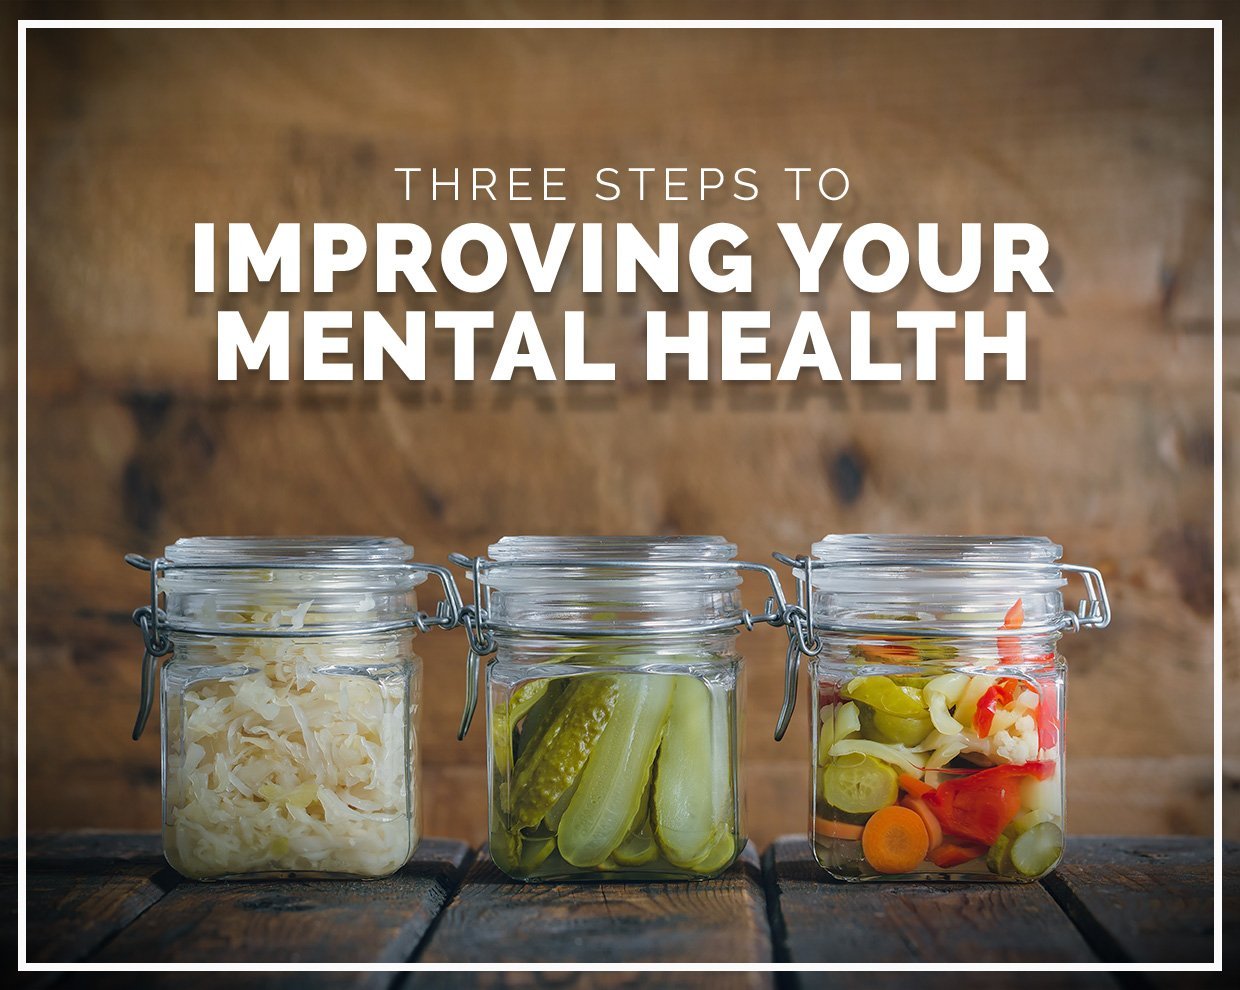 Three steps to improving your mental health using nutrition 